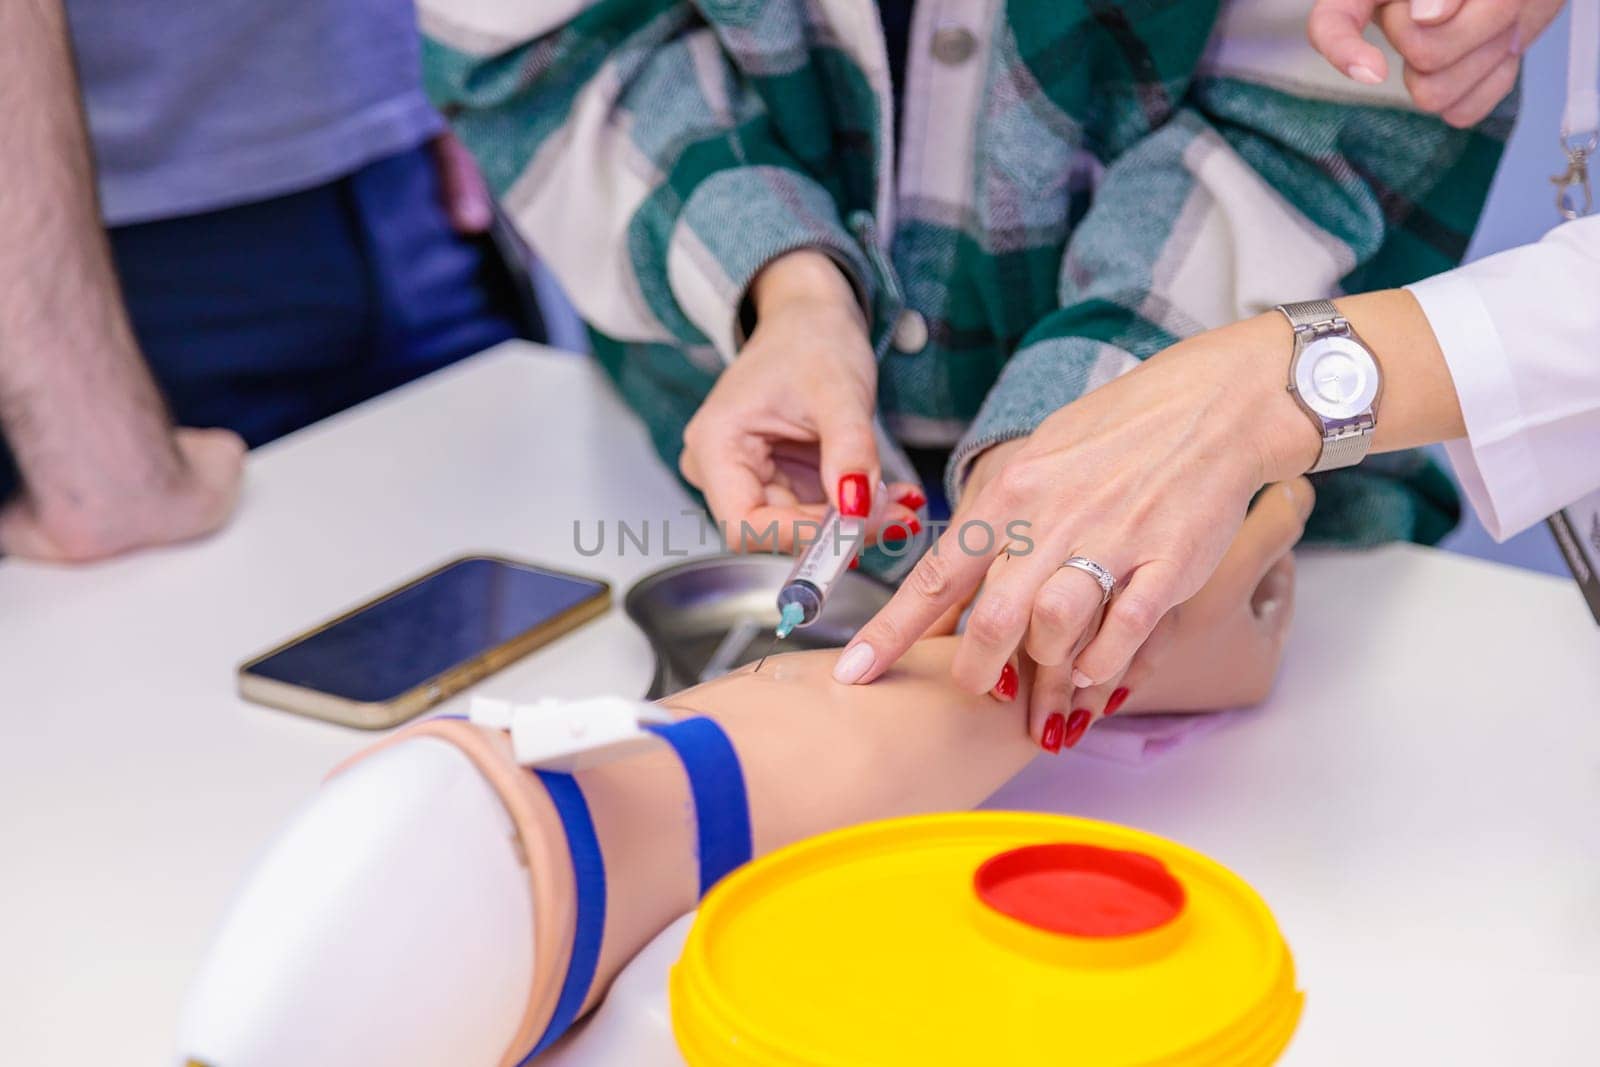 Training of blood sampling from a vein, on a model of a human hand. High quality photo